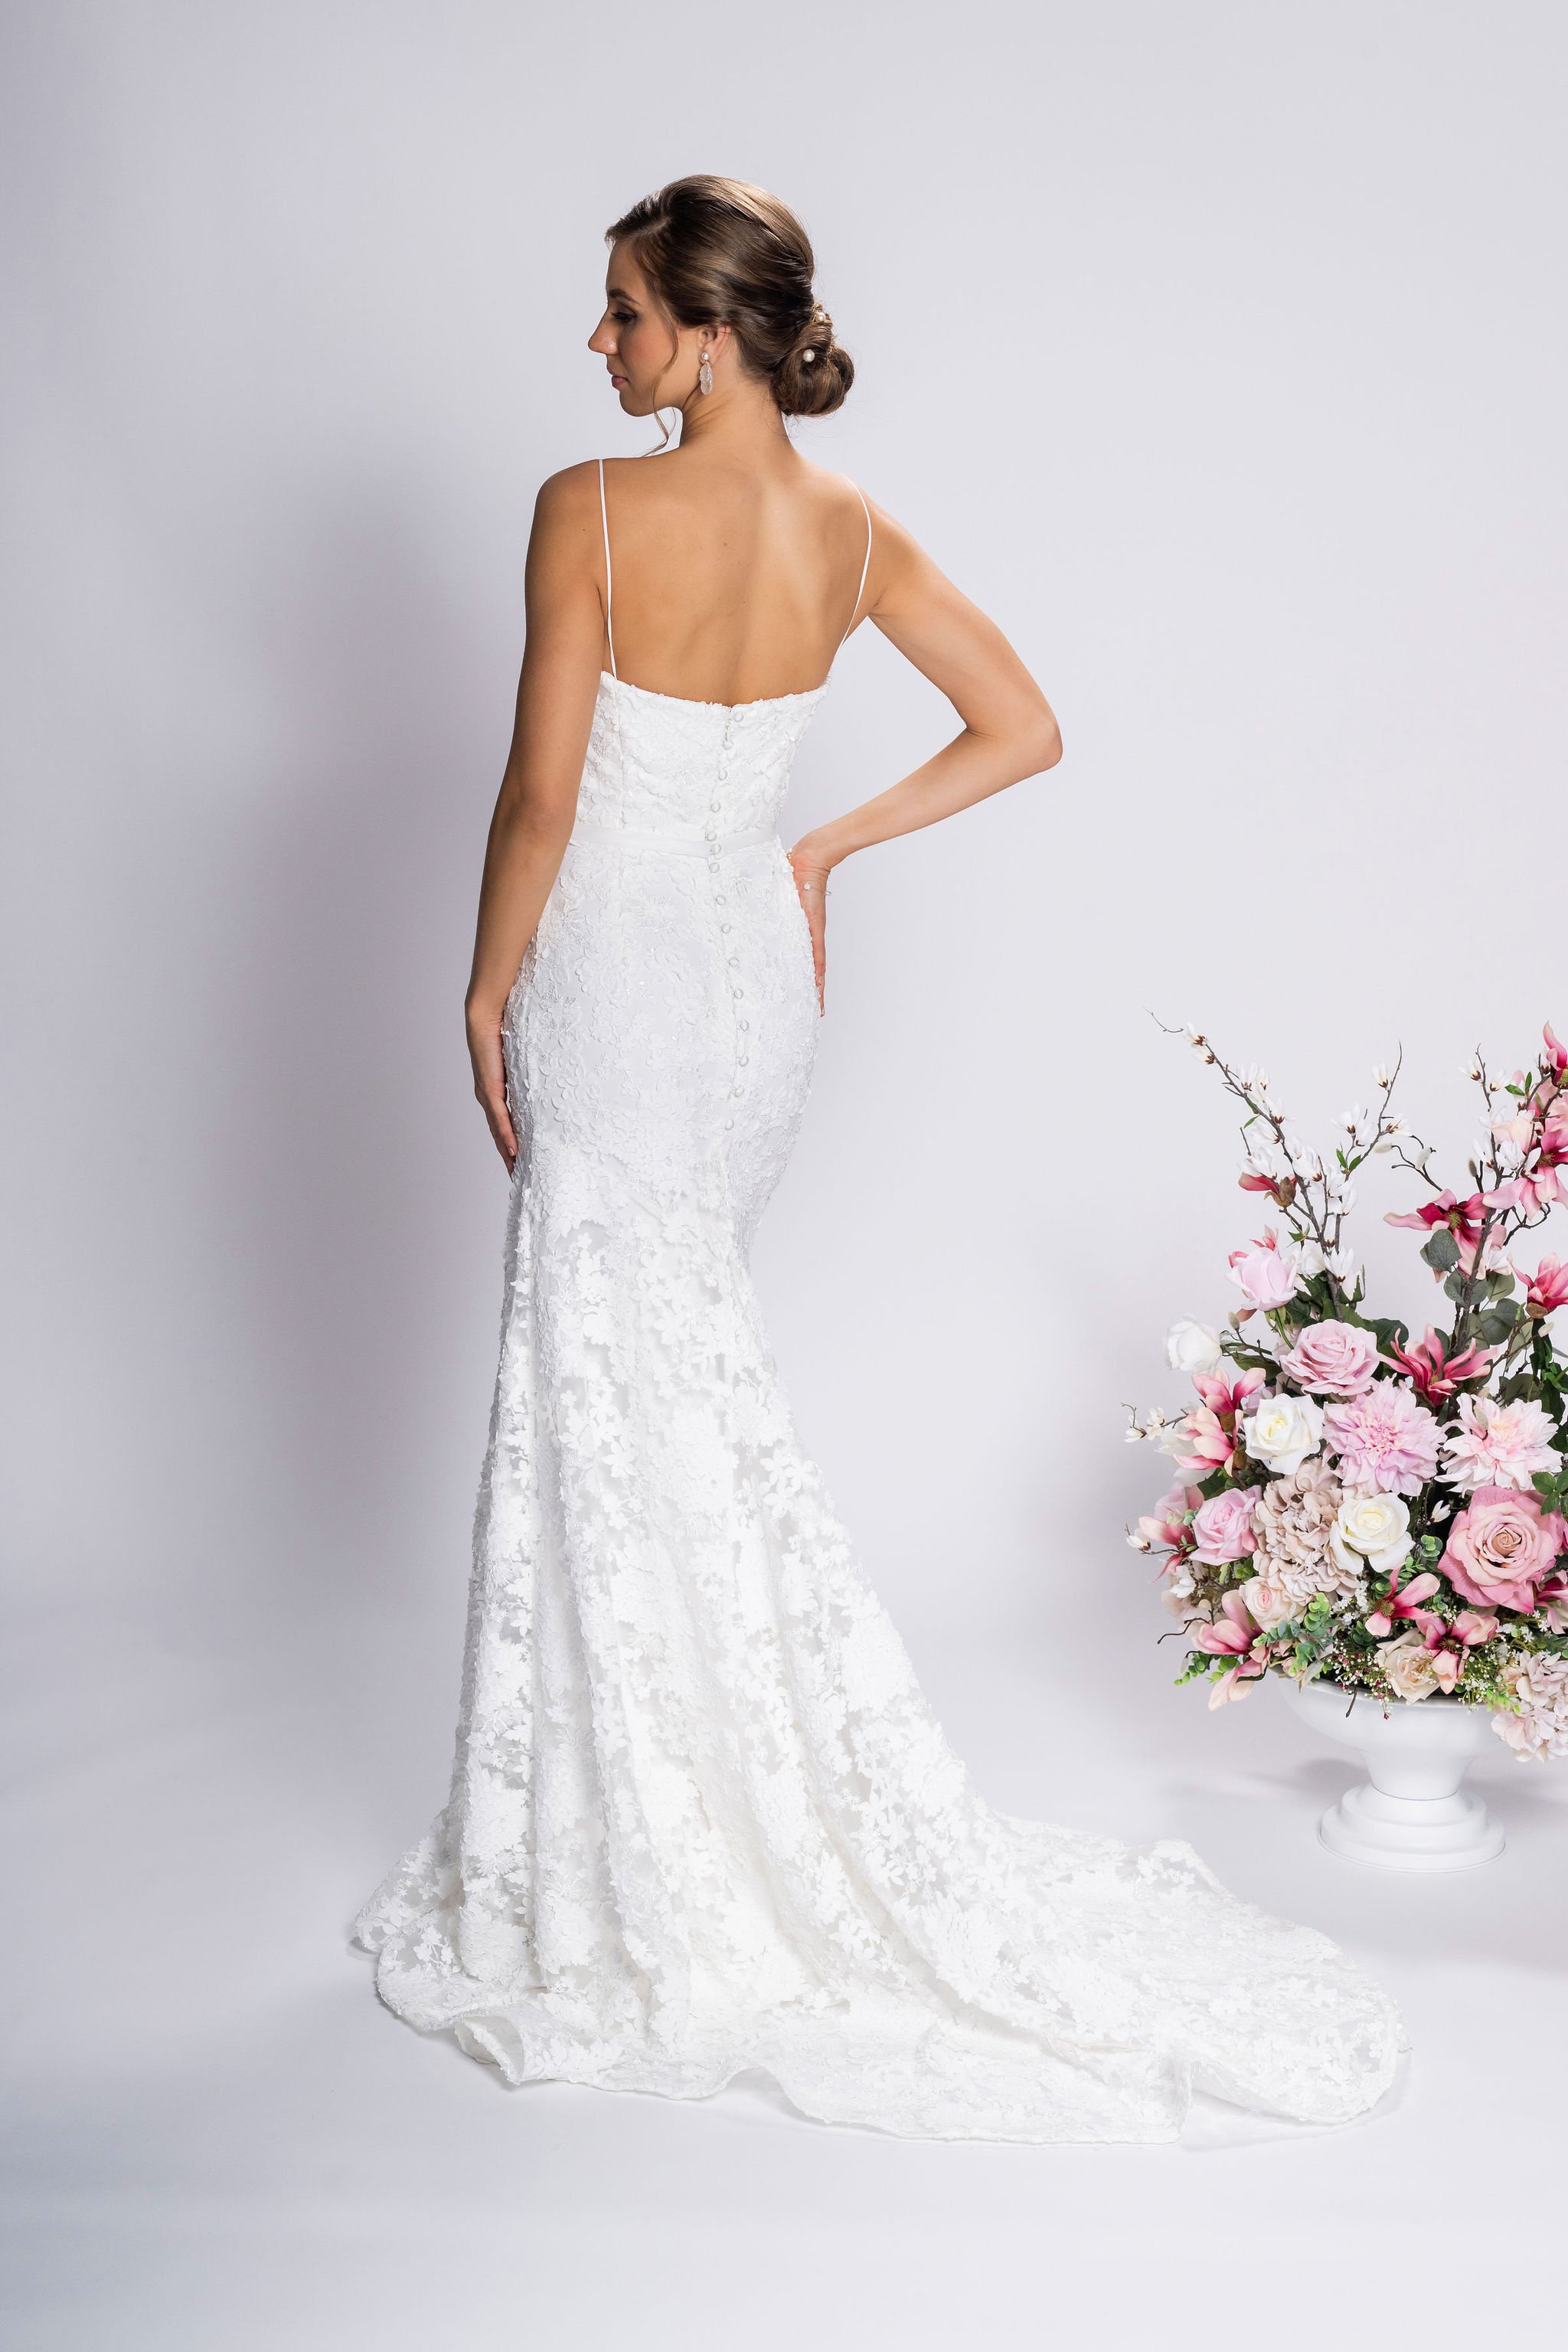 Coordinate The Details With Your Show-Stopping Wedding Dress - New York  Bride & Groom of Raleigh